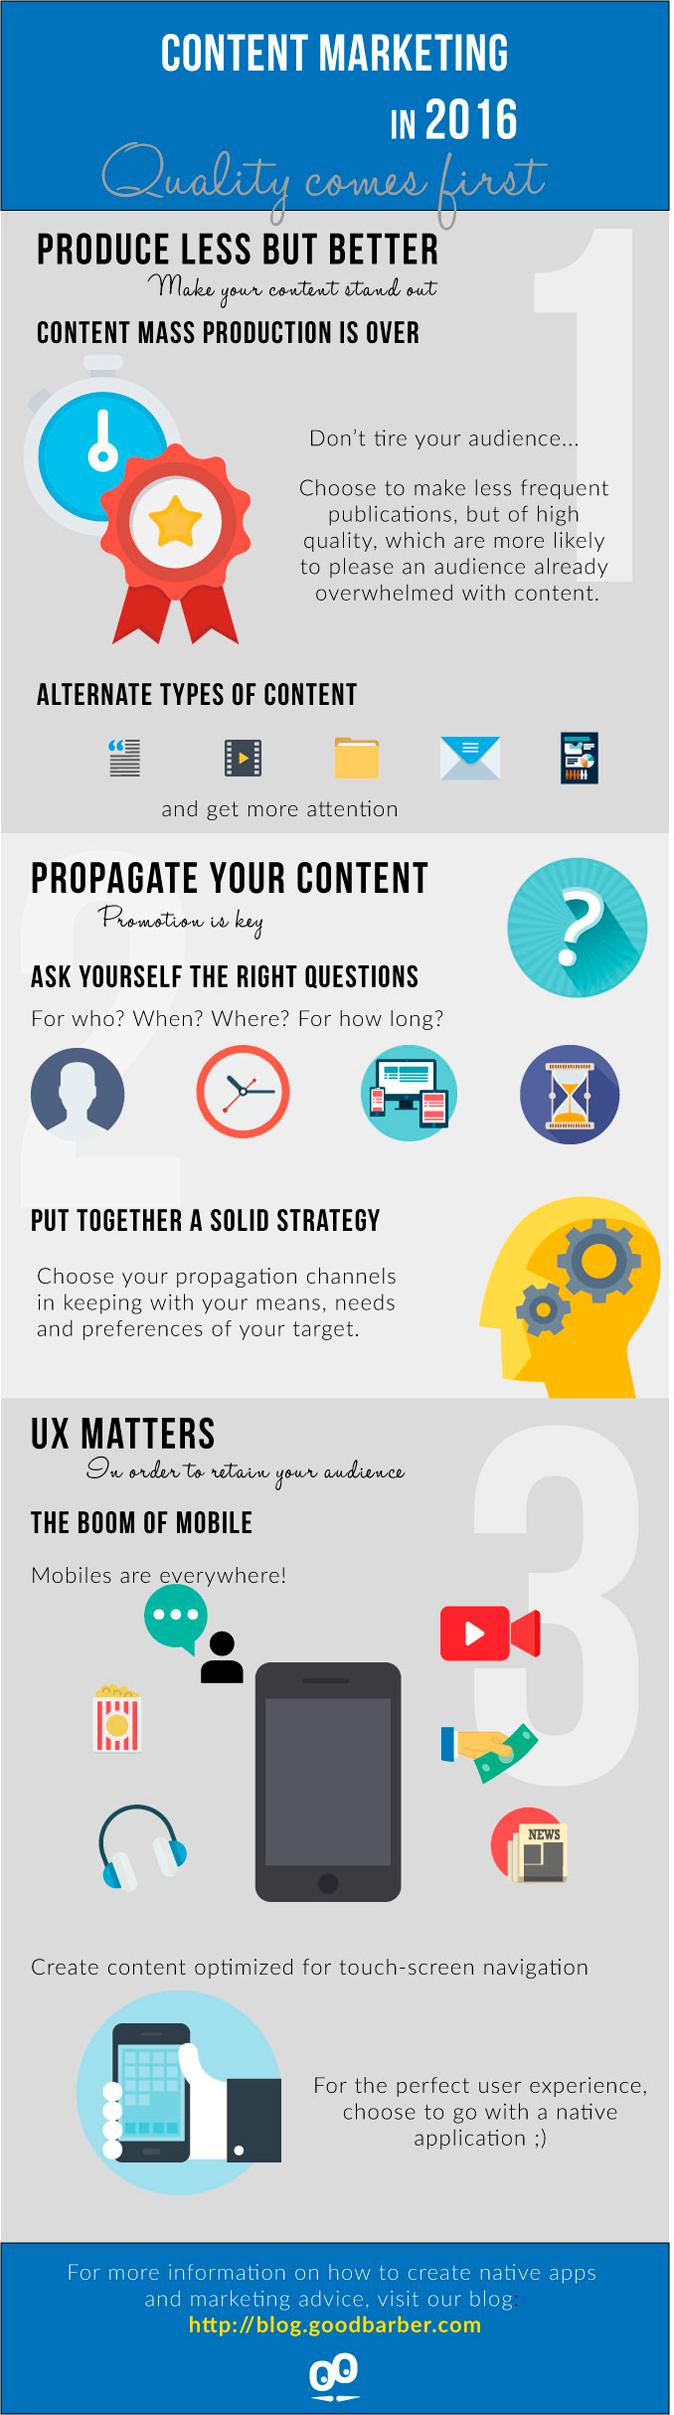 Content Marketing Trends for 2016 (Infographic)